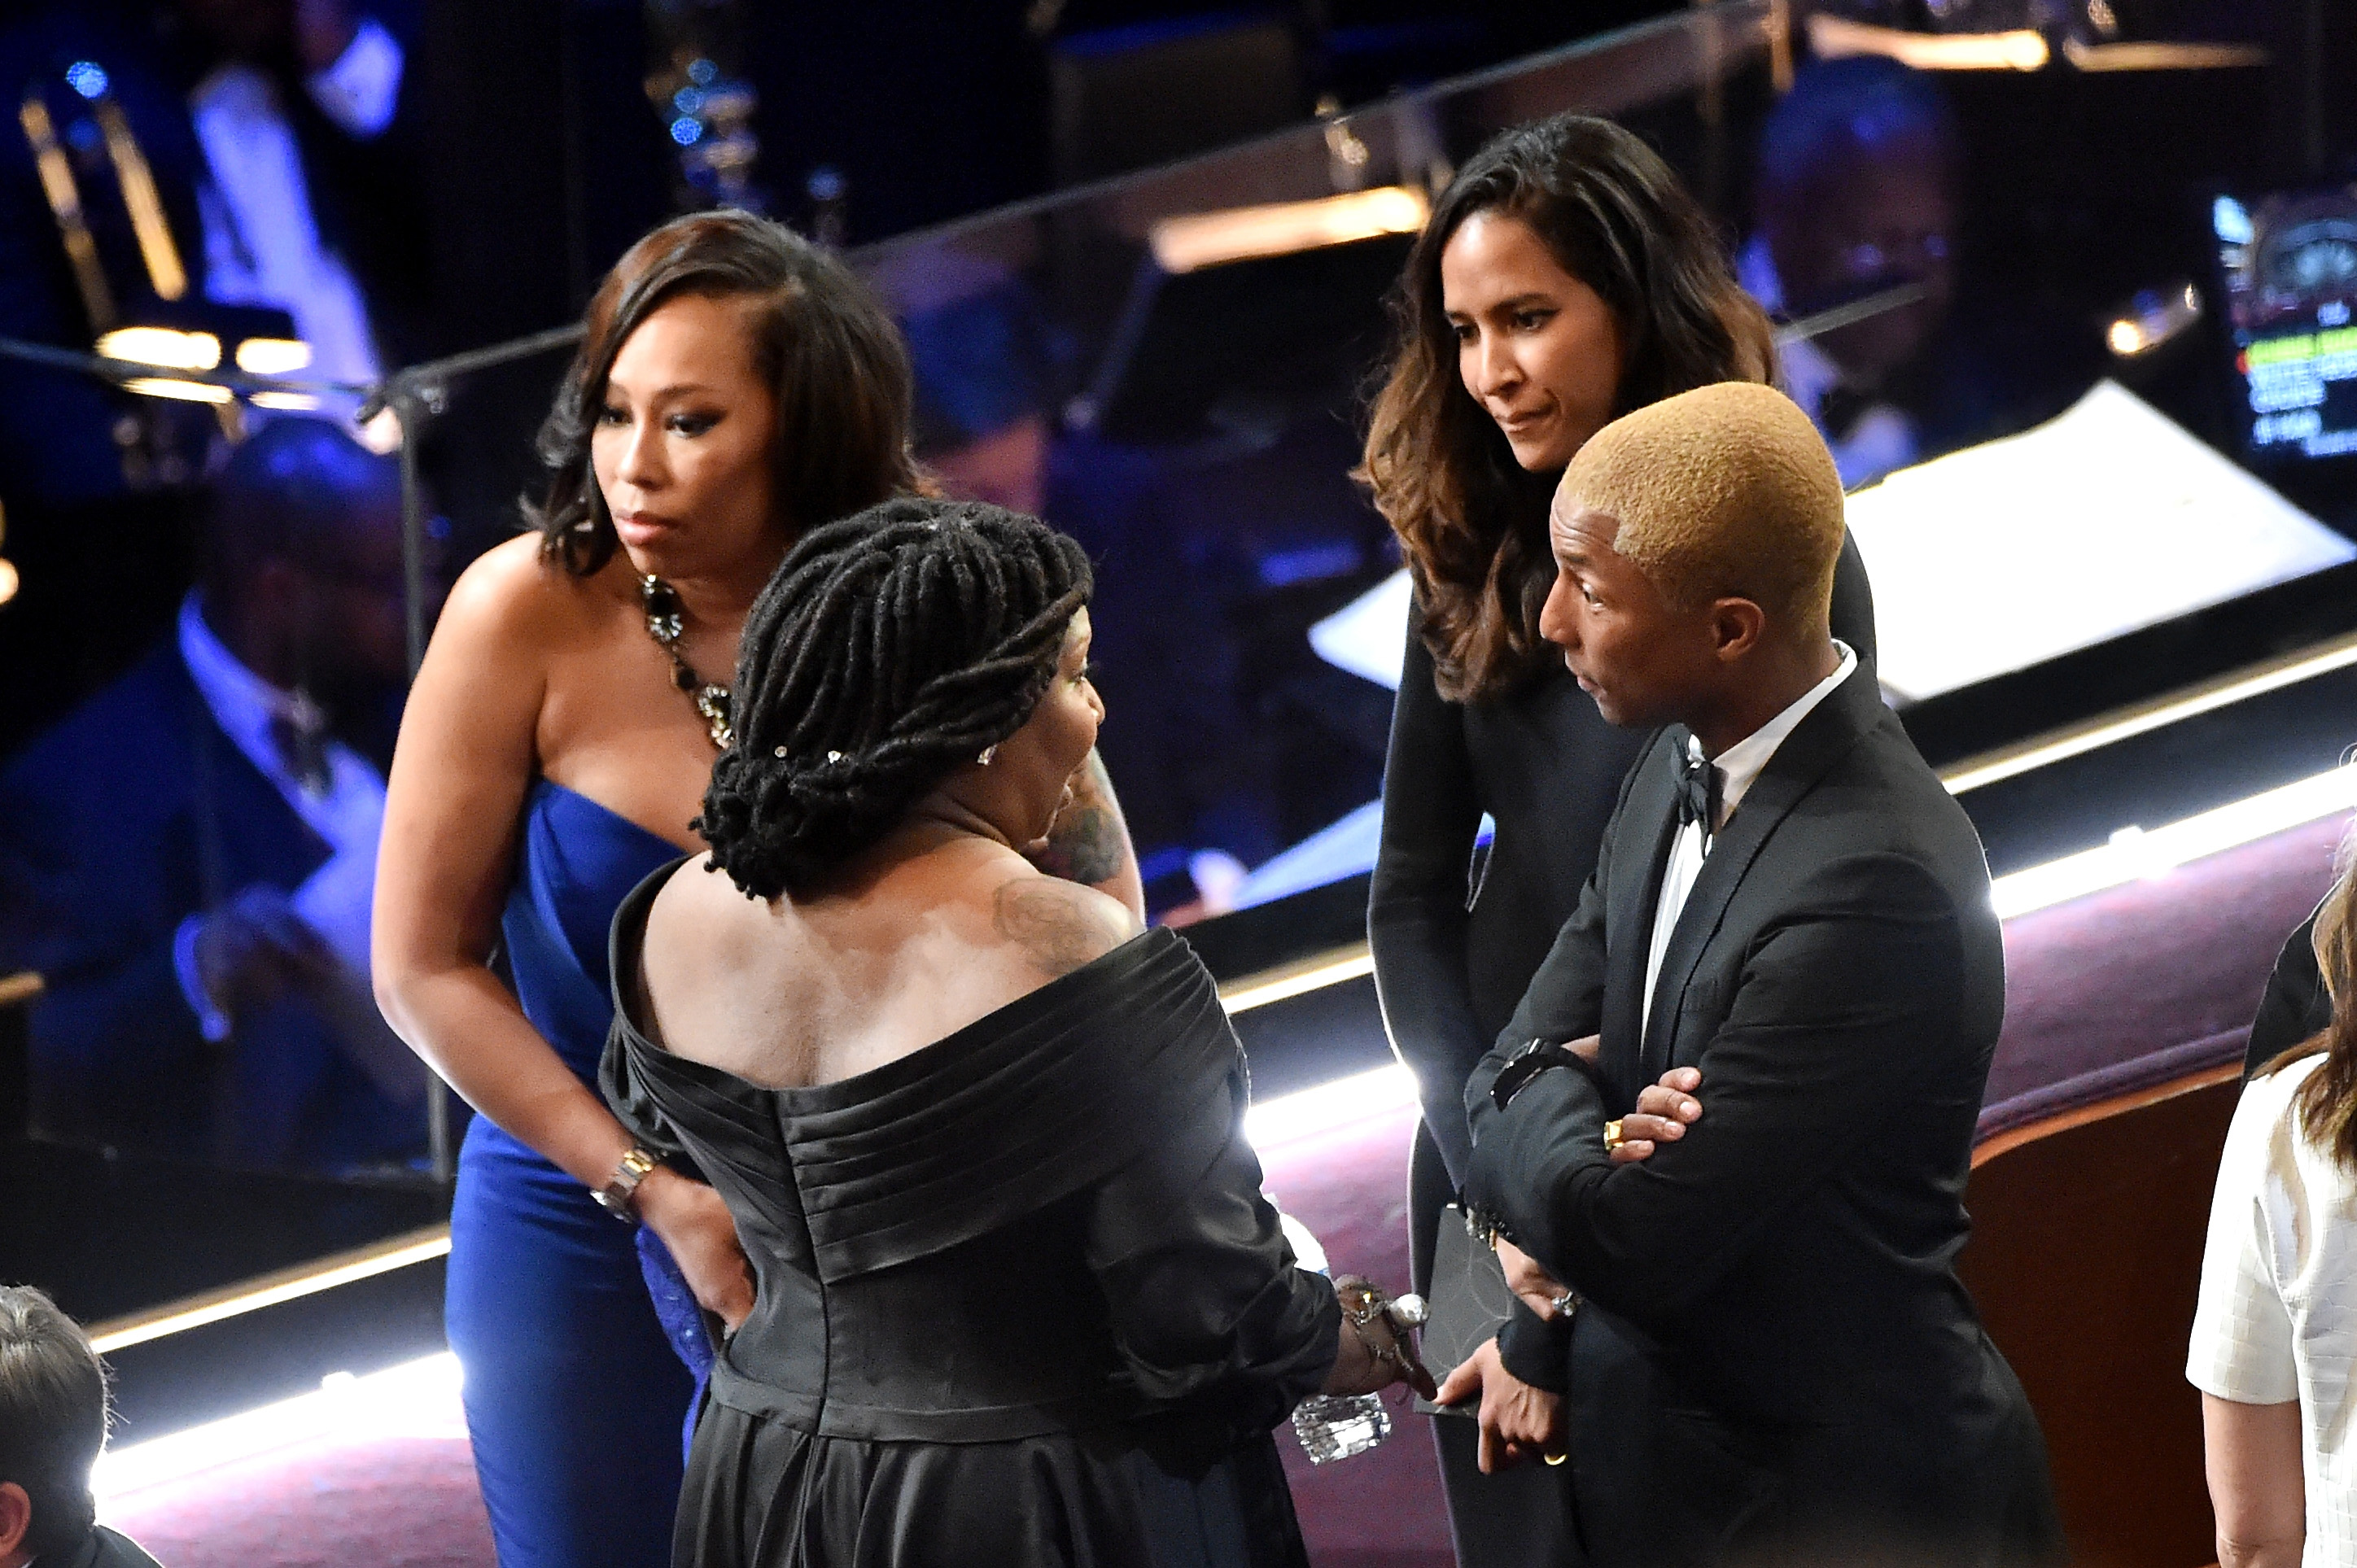  (L-R) Actor Whoopi Goldberg, musician Pharrell Williams and Helen Lasichanh in the audience during the 88th Annual Academy Awards. (Photo by Kevin Winter/Getty Images)